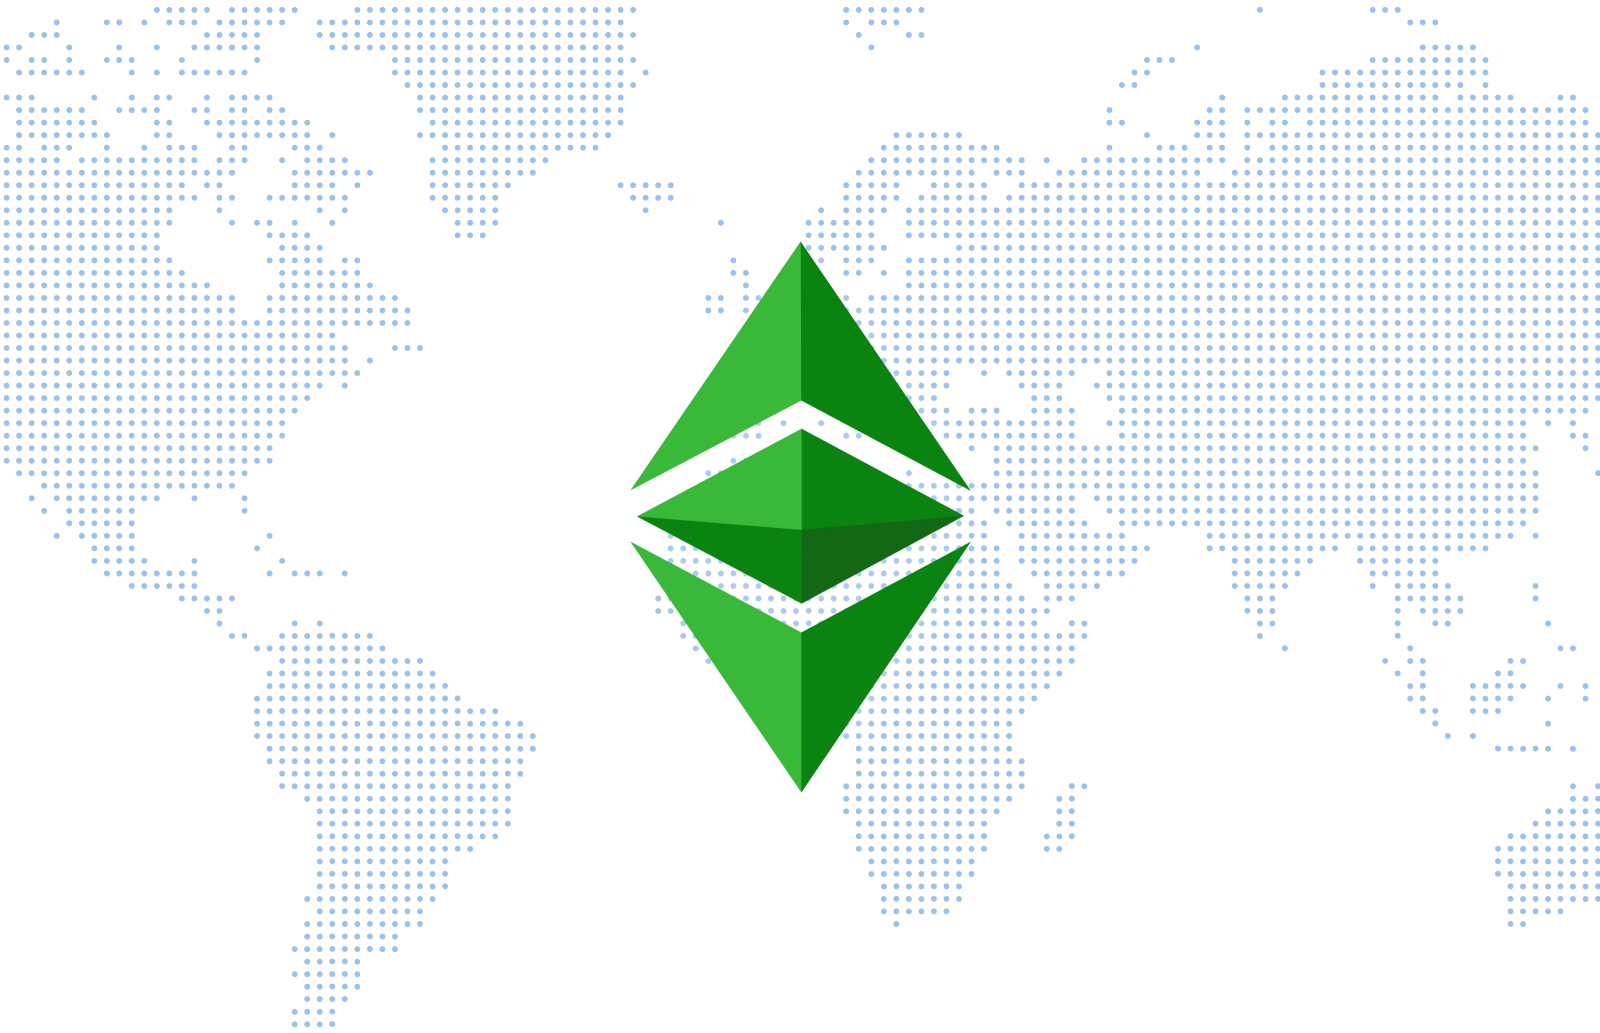 Ethereum Classic to be listed on Coinbase